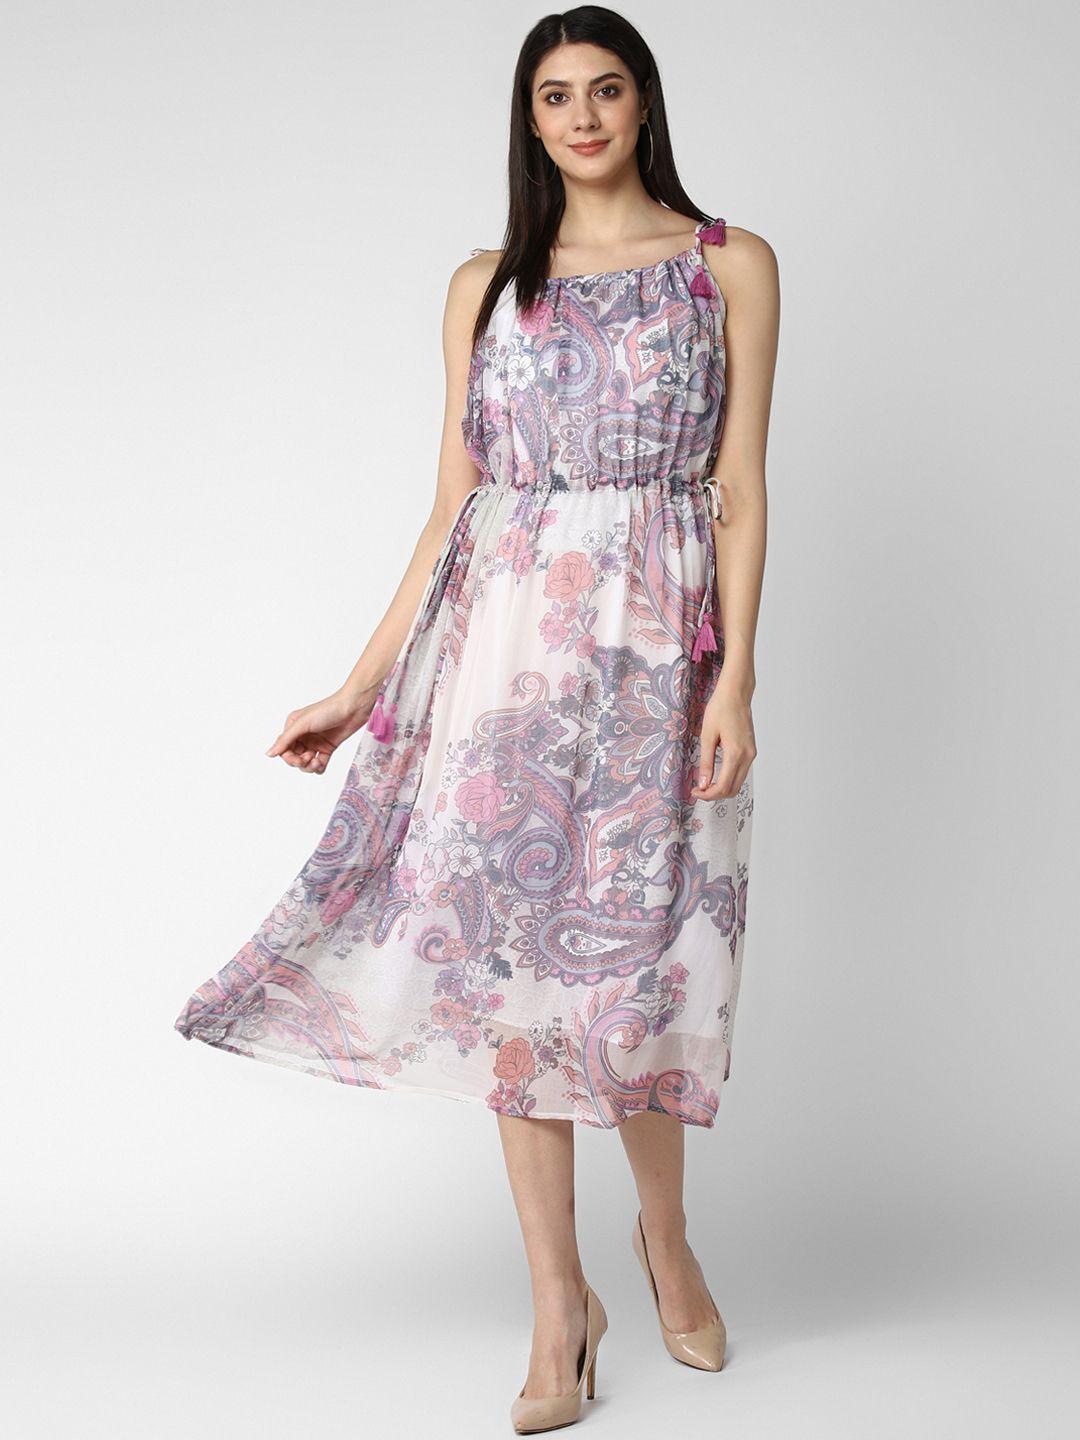 stylestone-women-lavender-&-white-printed-fit-and-flare-dress